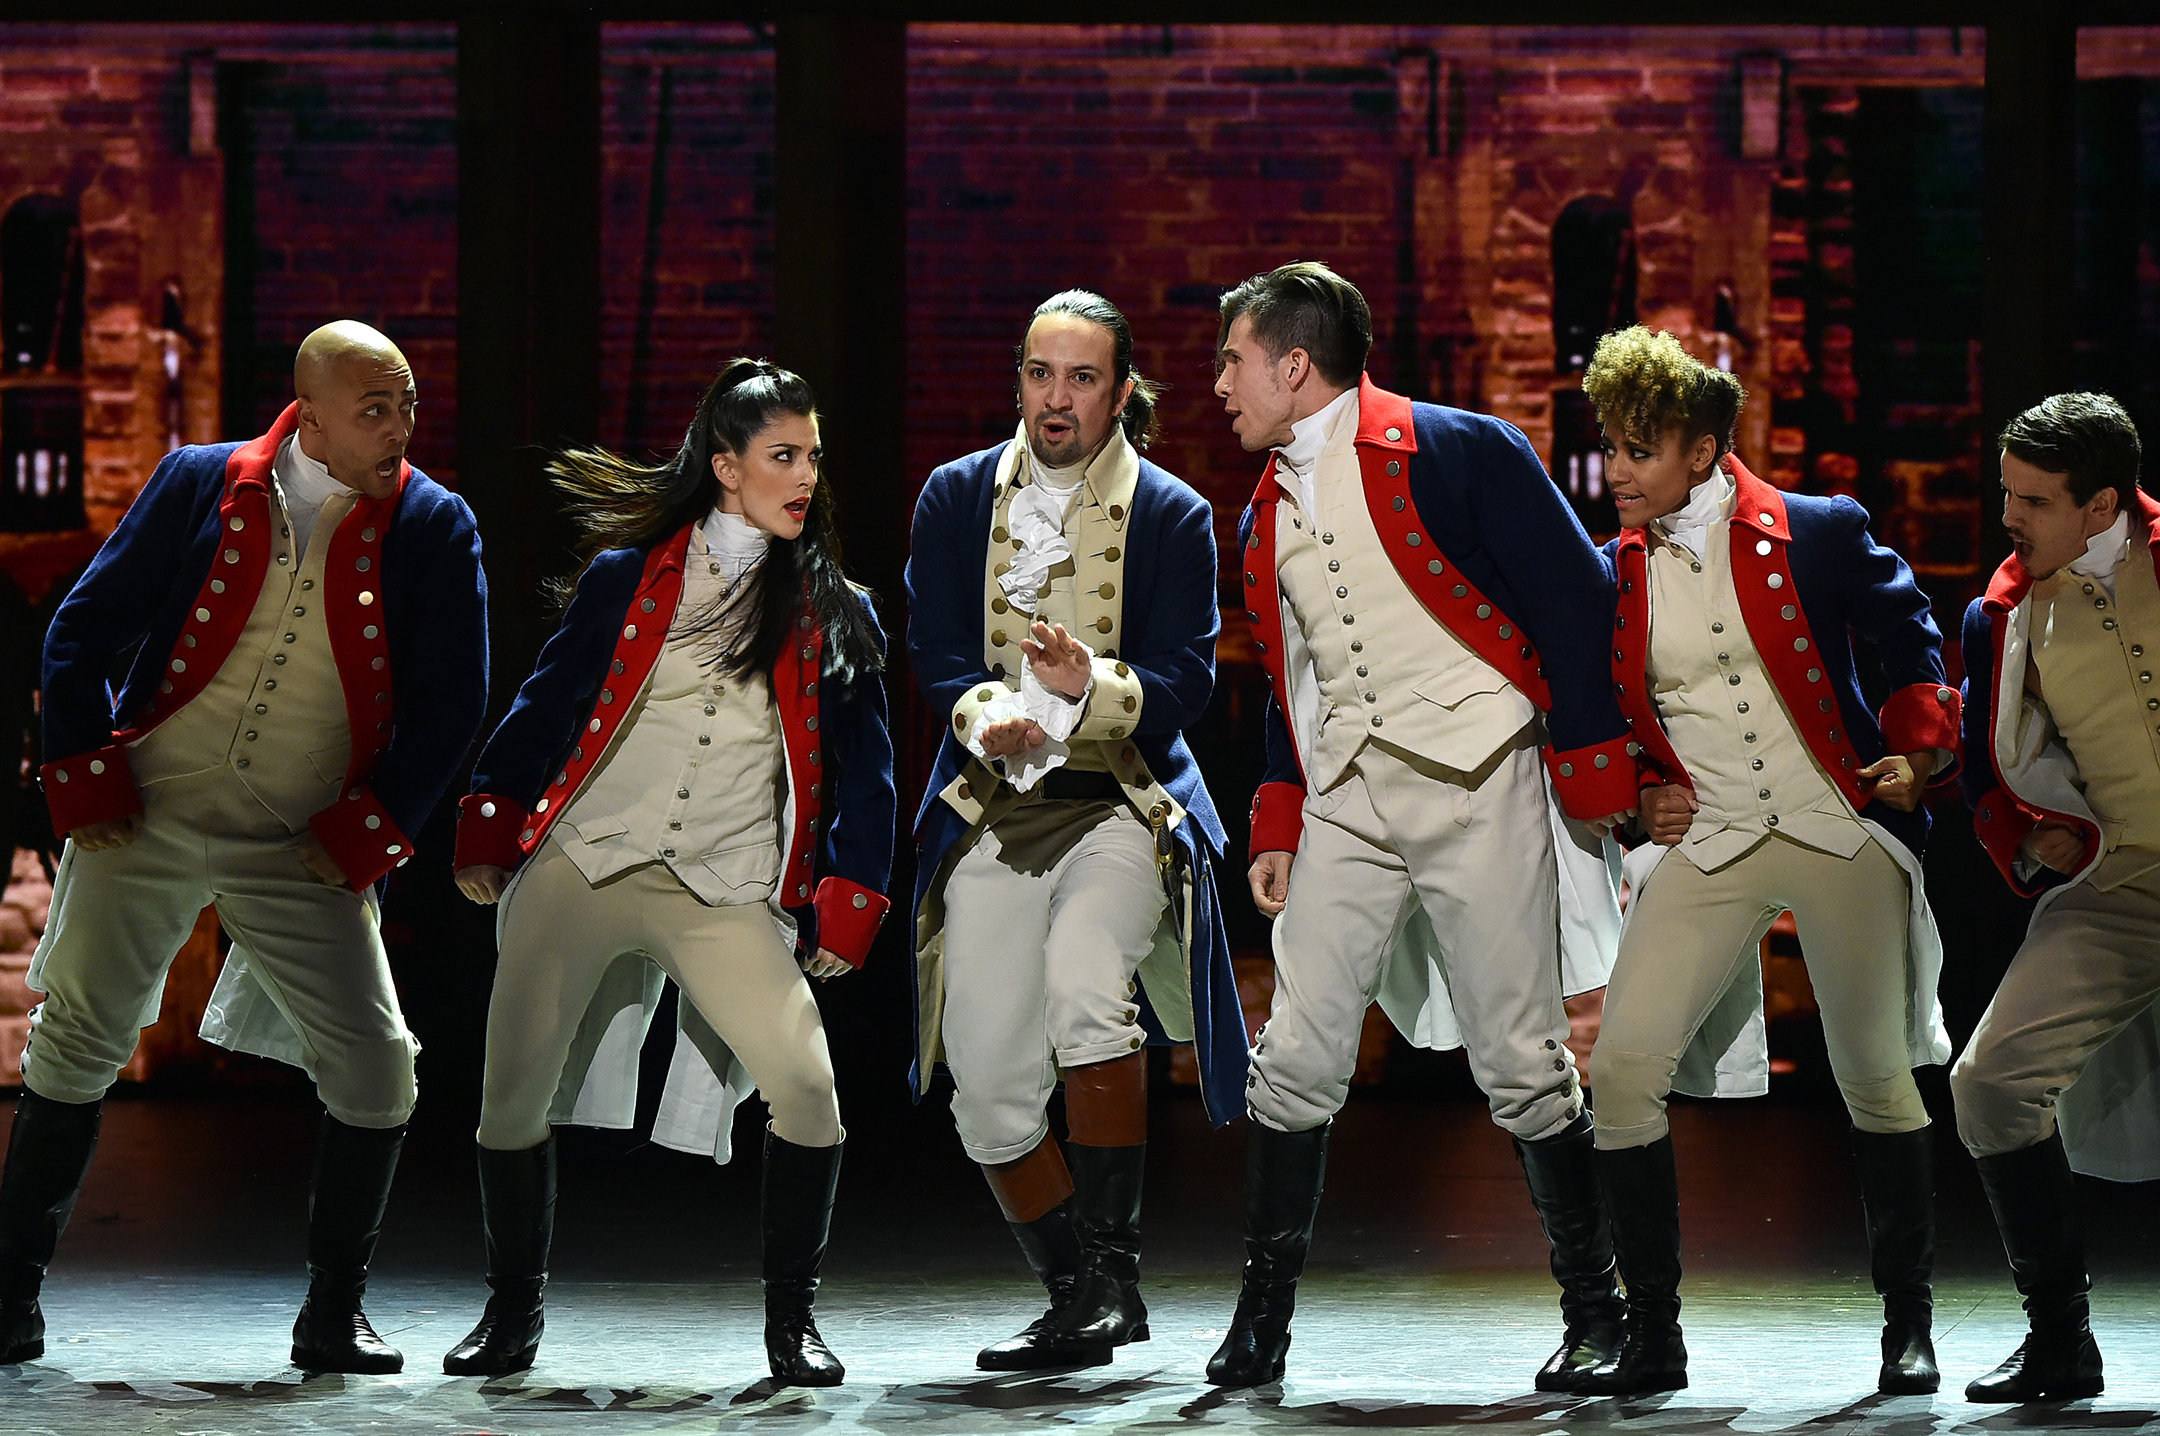 cast of the musical hamilton performing at the 2016 tony awards